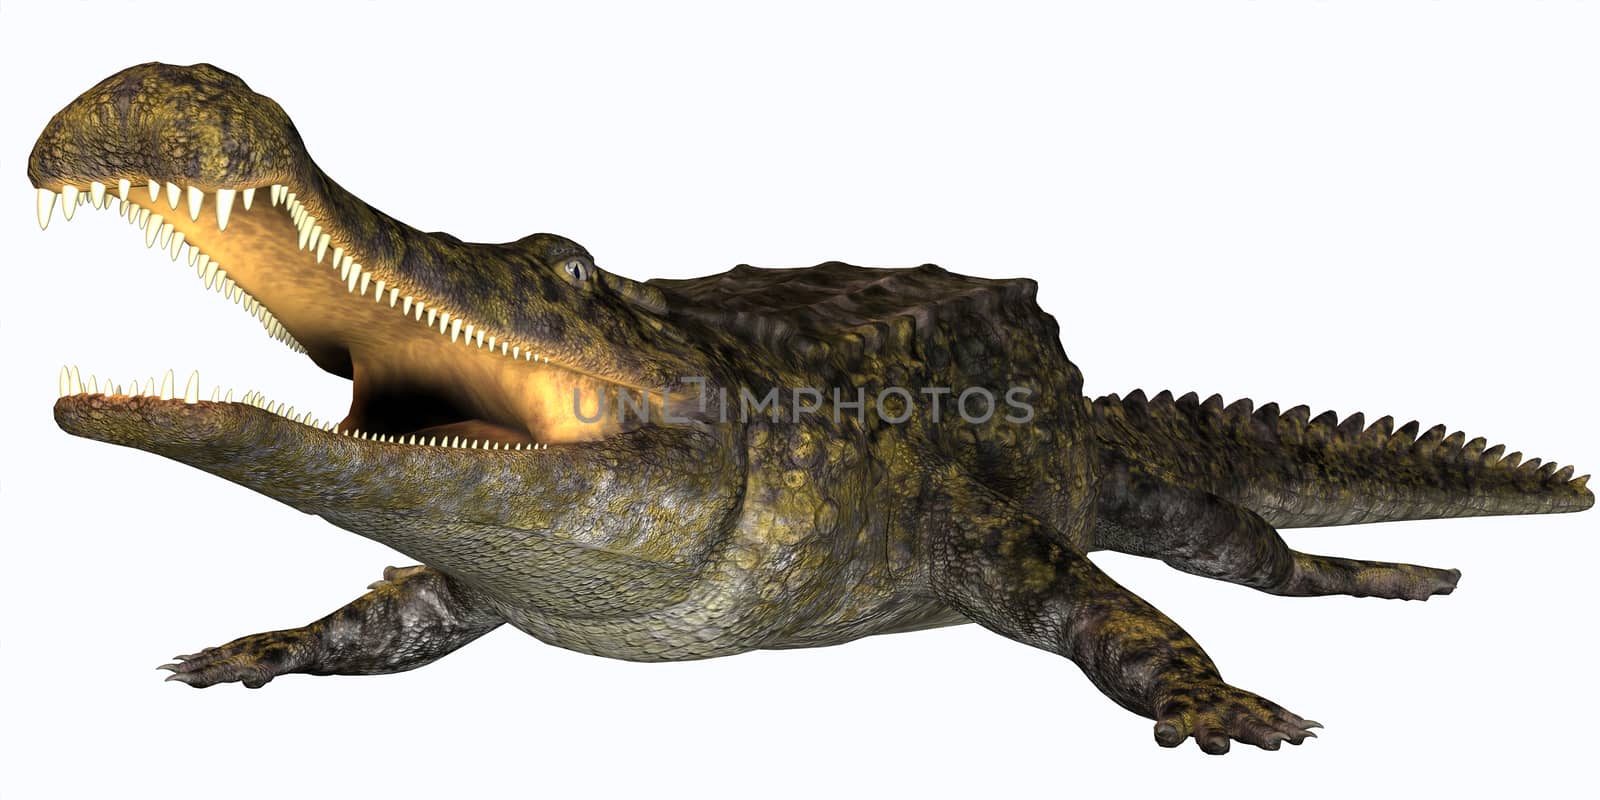 Sarcosuchus is an extinct genus of carnivorous crocodile that lived in the Cretaceous Period of Africa.